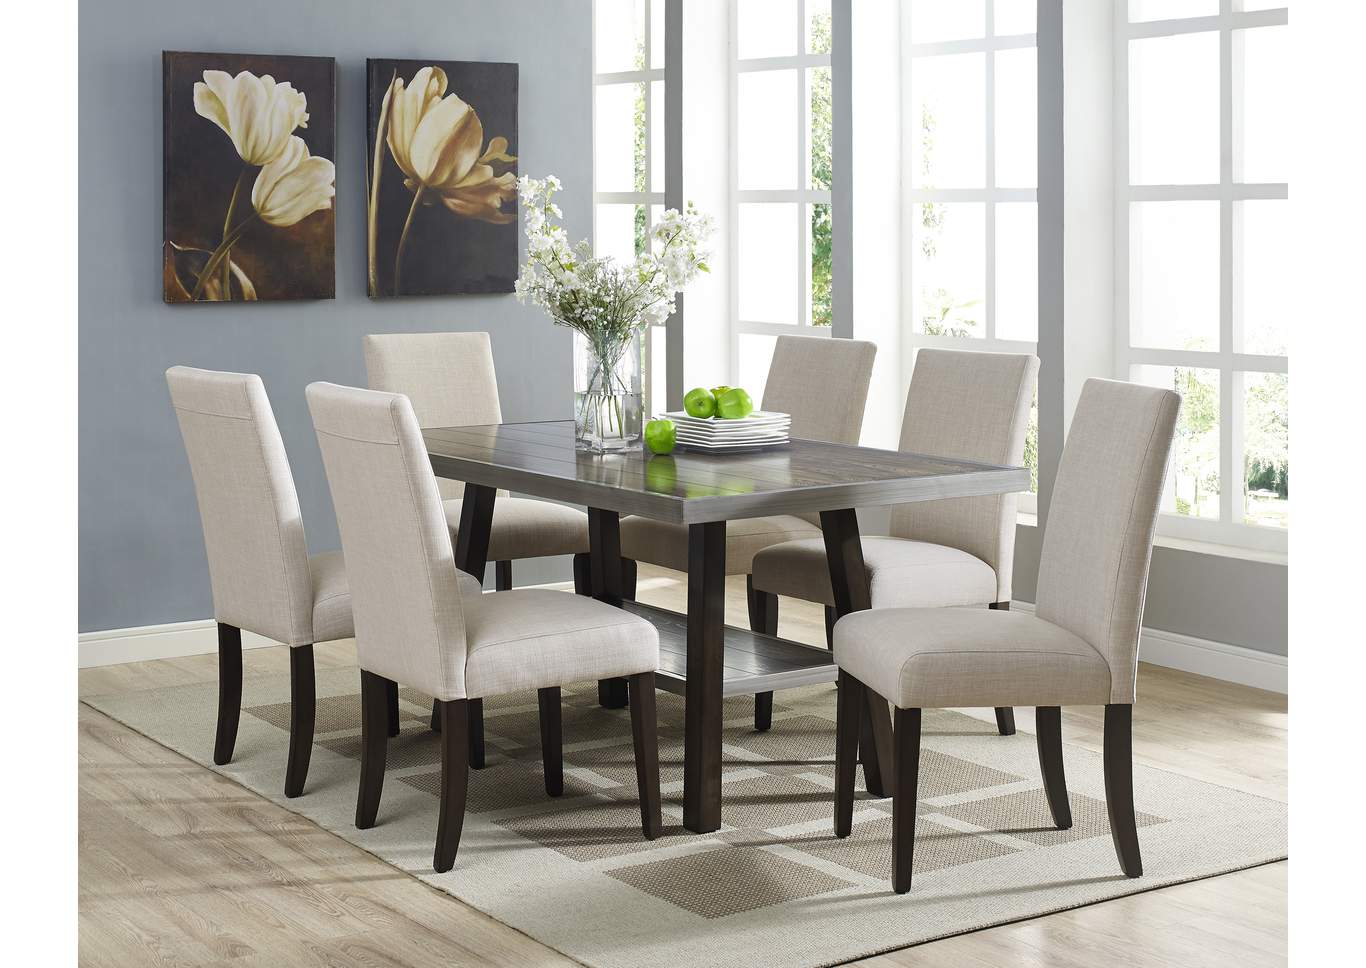 ivan smith dining room tables